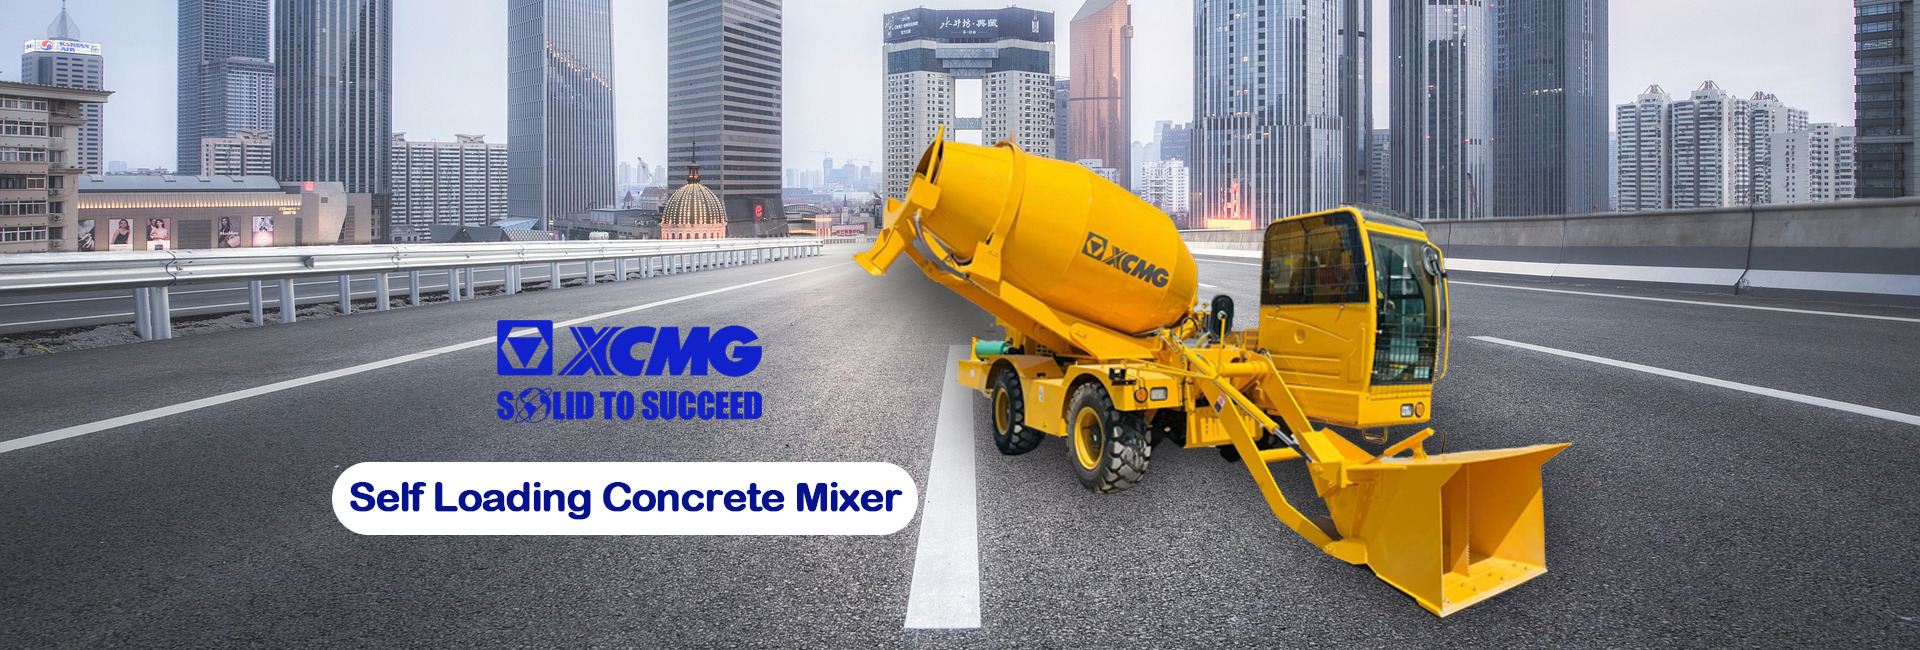 XCMG E-commerce Inc. - Construction machinery XCMG undefined: picture 1